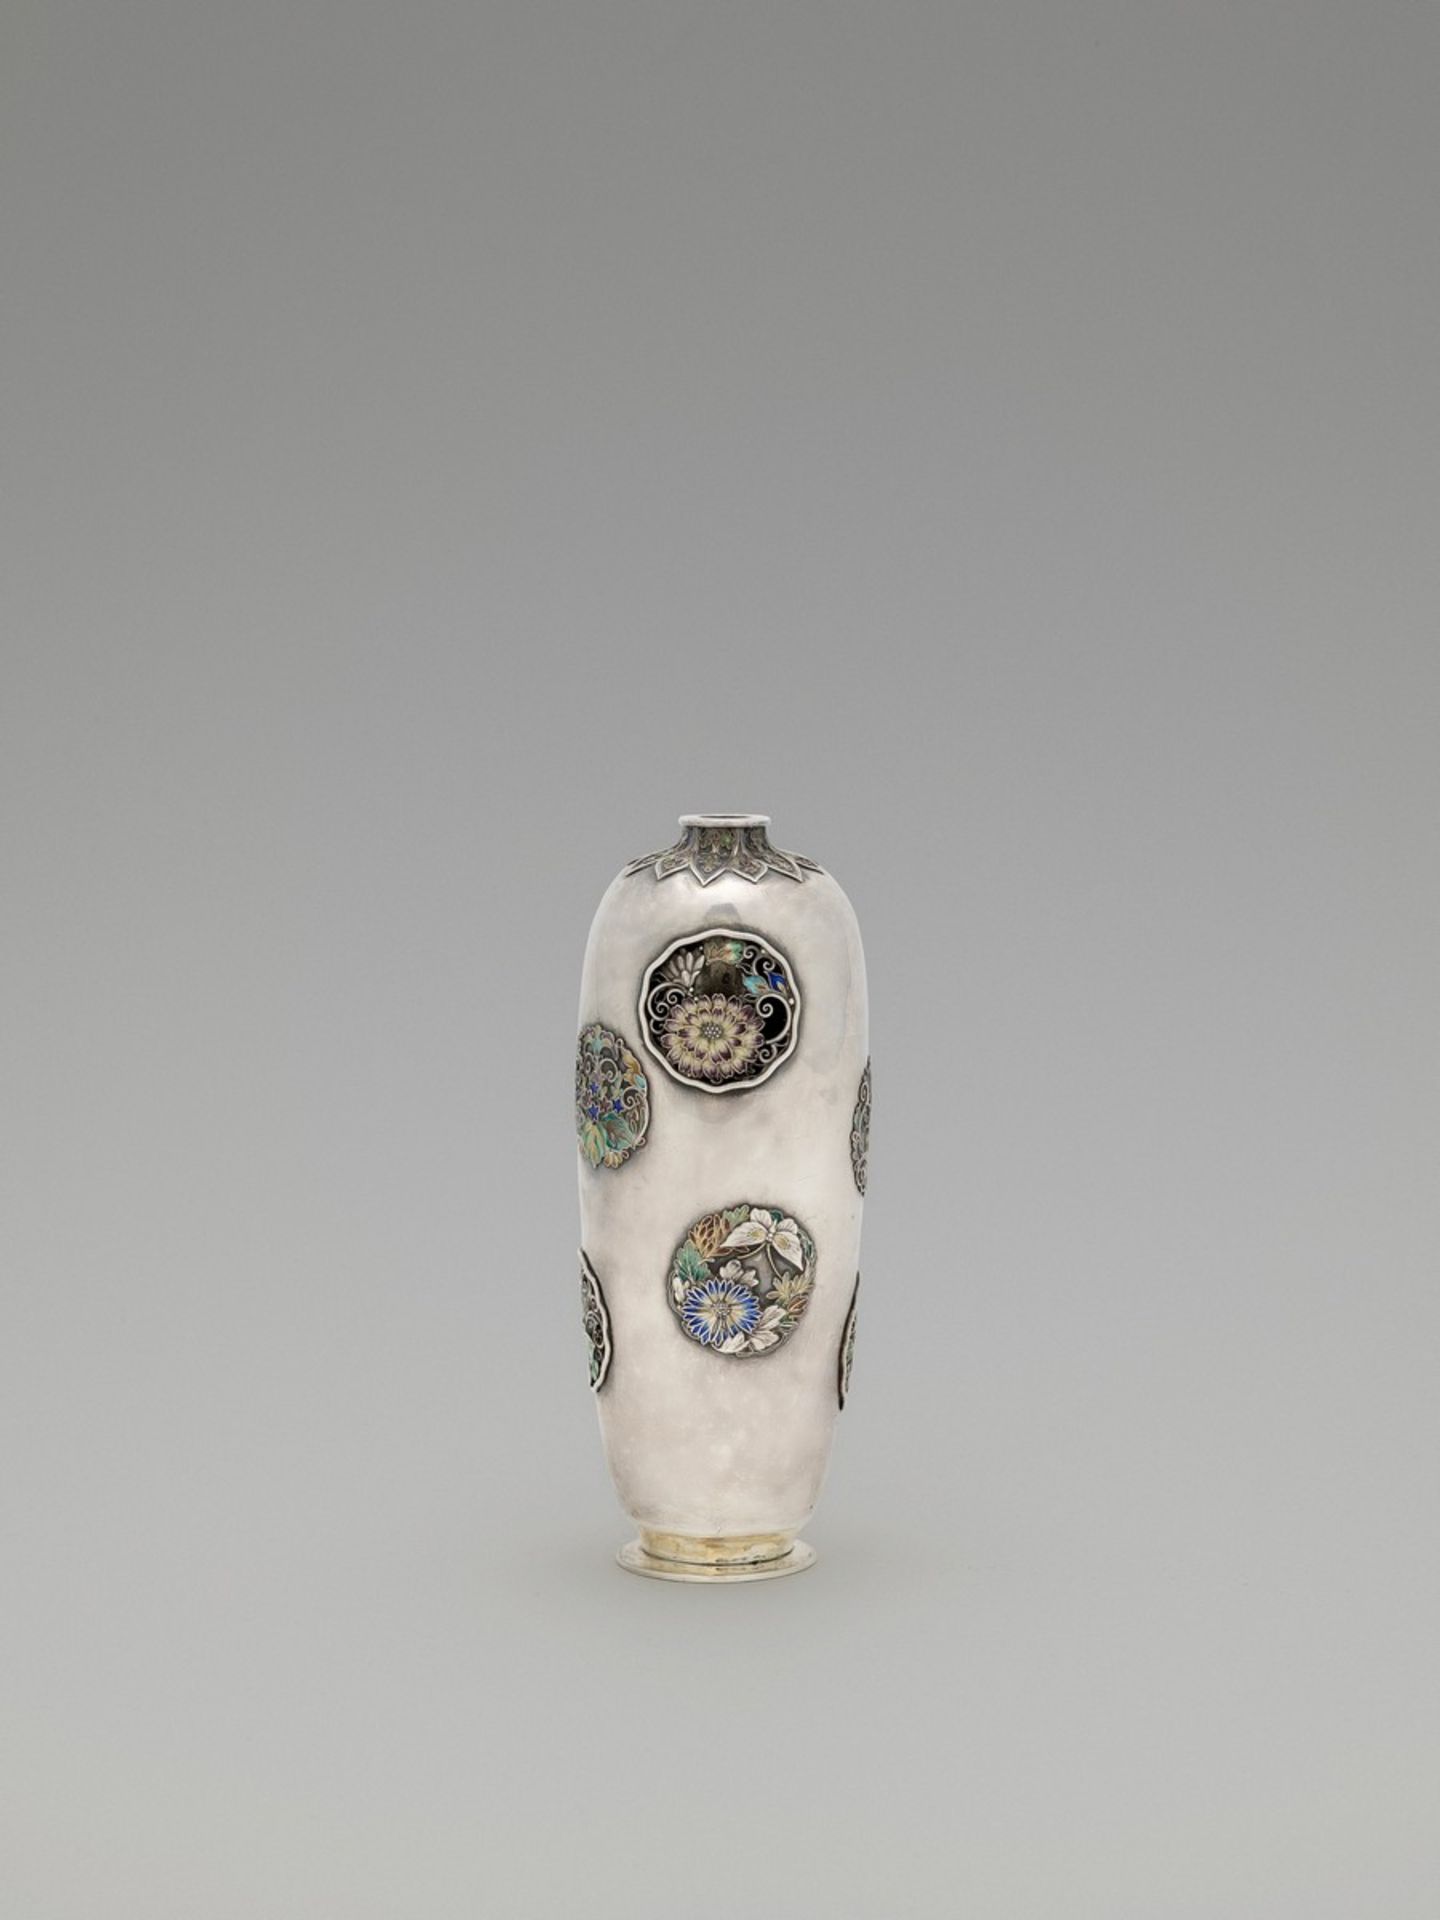 A RARE AND RETICULATED SILVER CLOISONNÉ “VASE WITHIN A VASE” ATTRIBUTED TO HIRATSUKA MOHEI